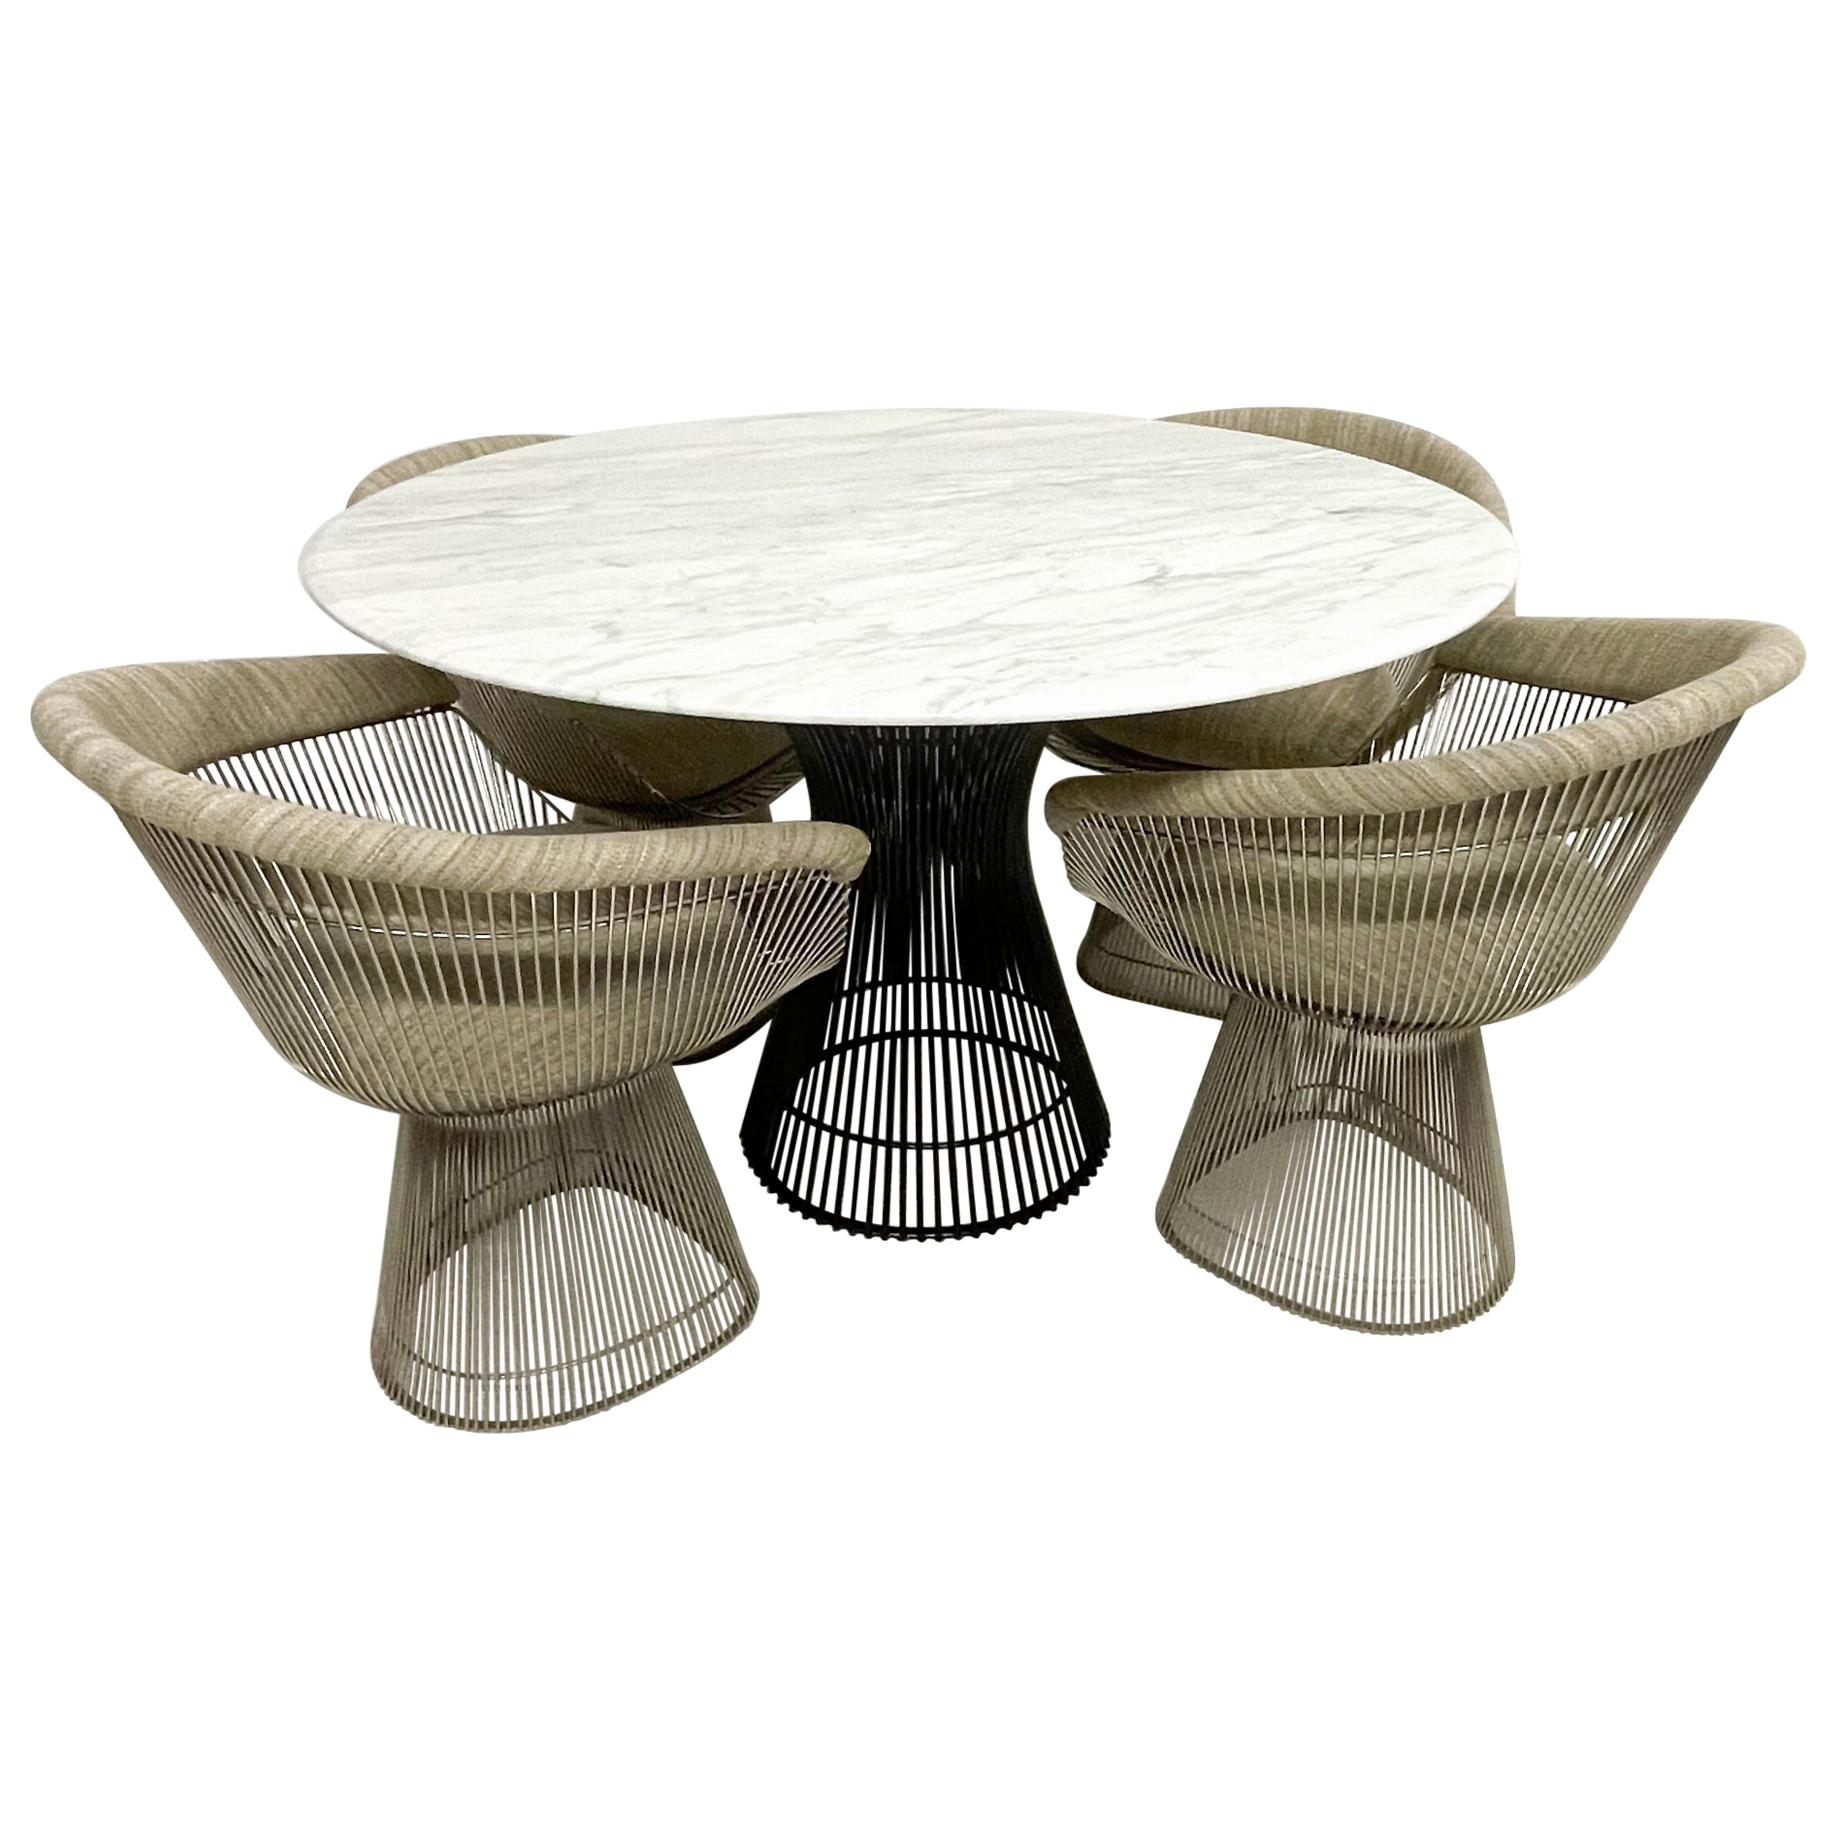 Warren Platner Dining Table and Chairs for Knoll Mid-Century Modern